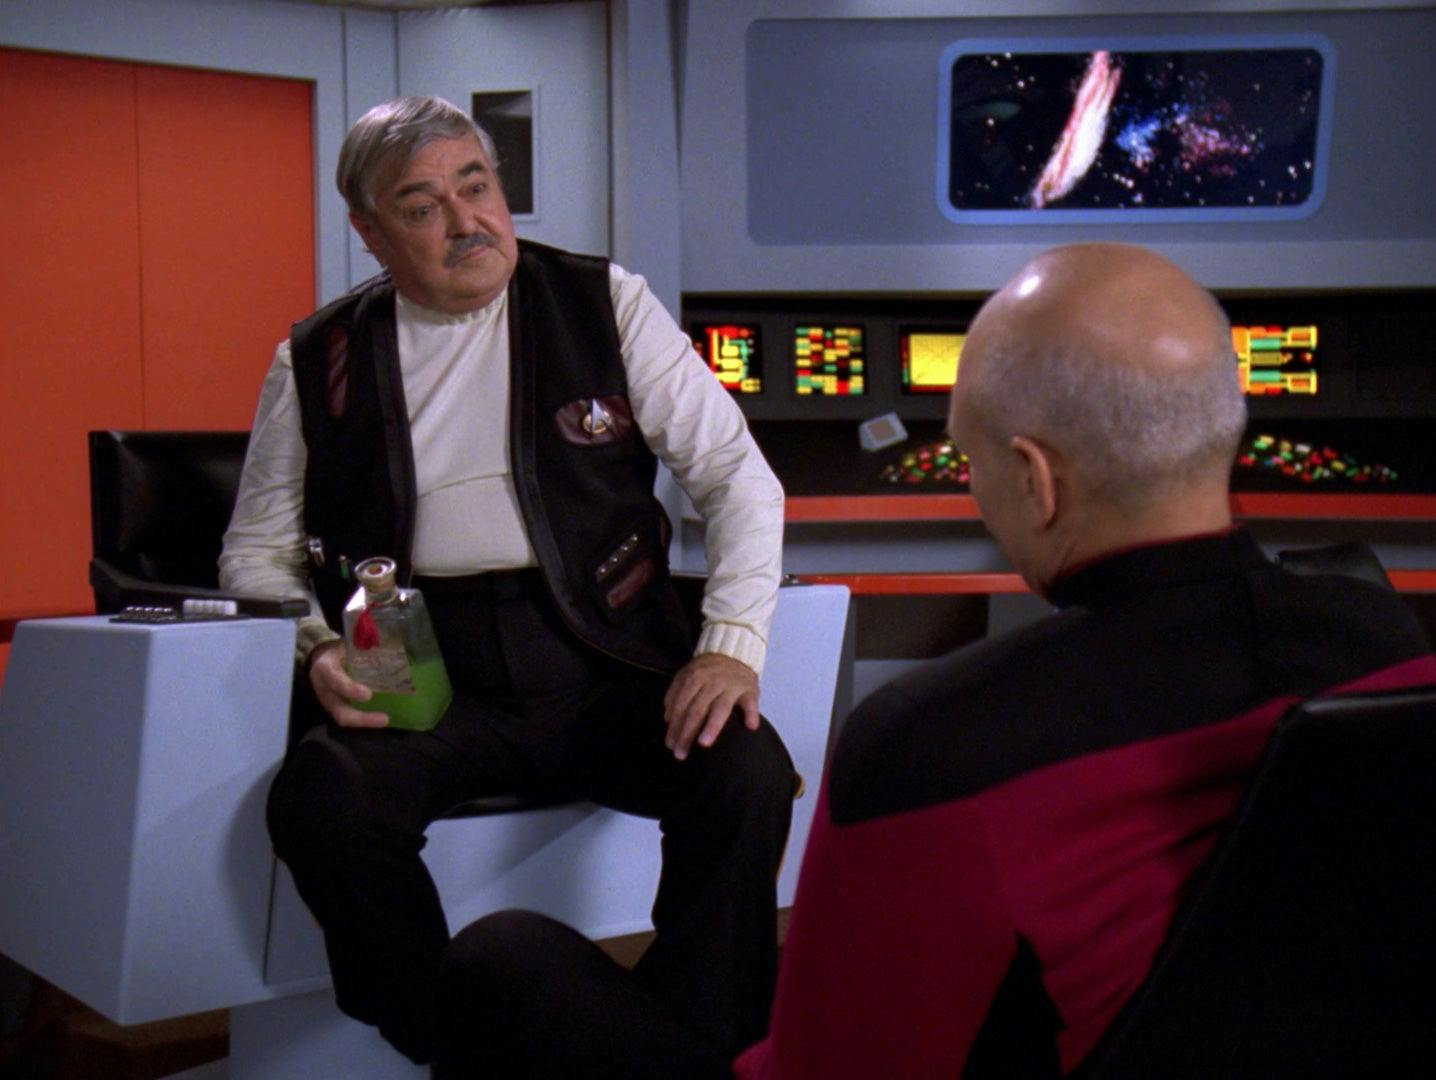 Scotty and Picard sit on the original Enterprise NCC-1701 on the holodeck in 'Relics'